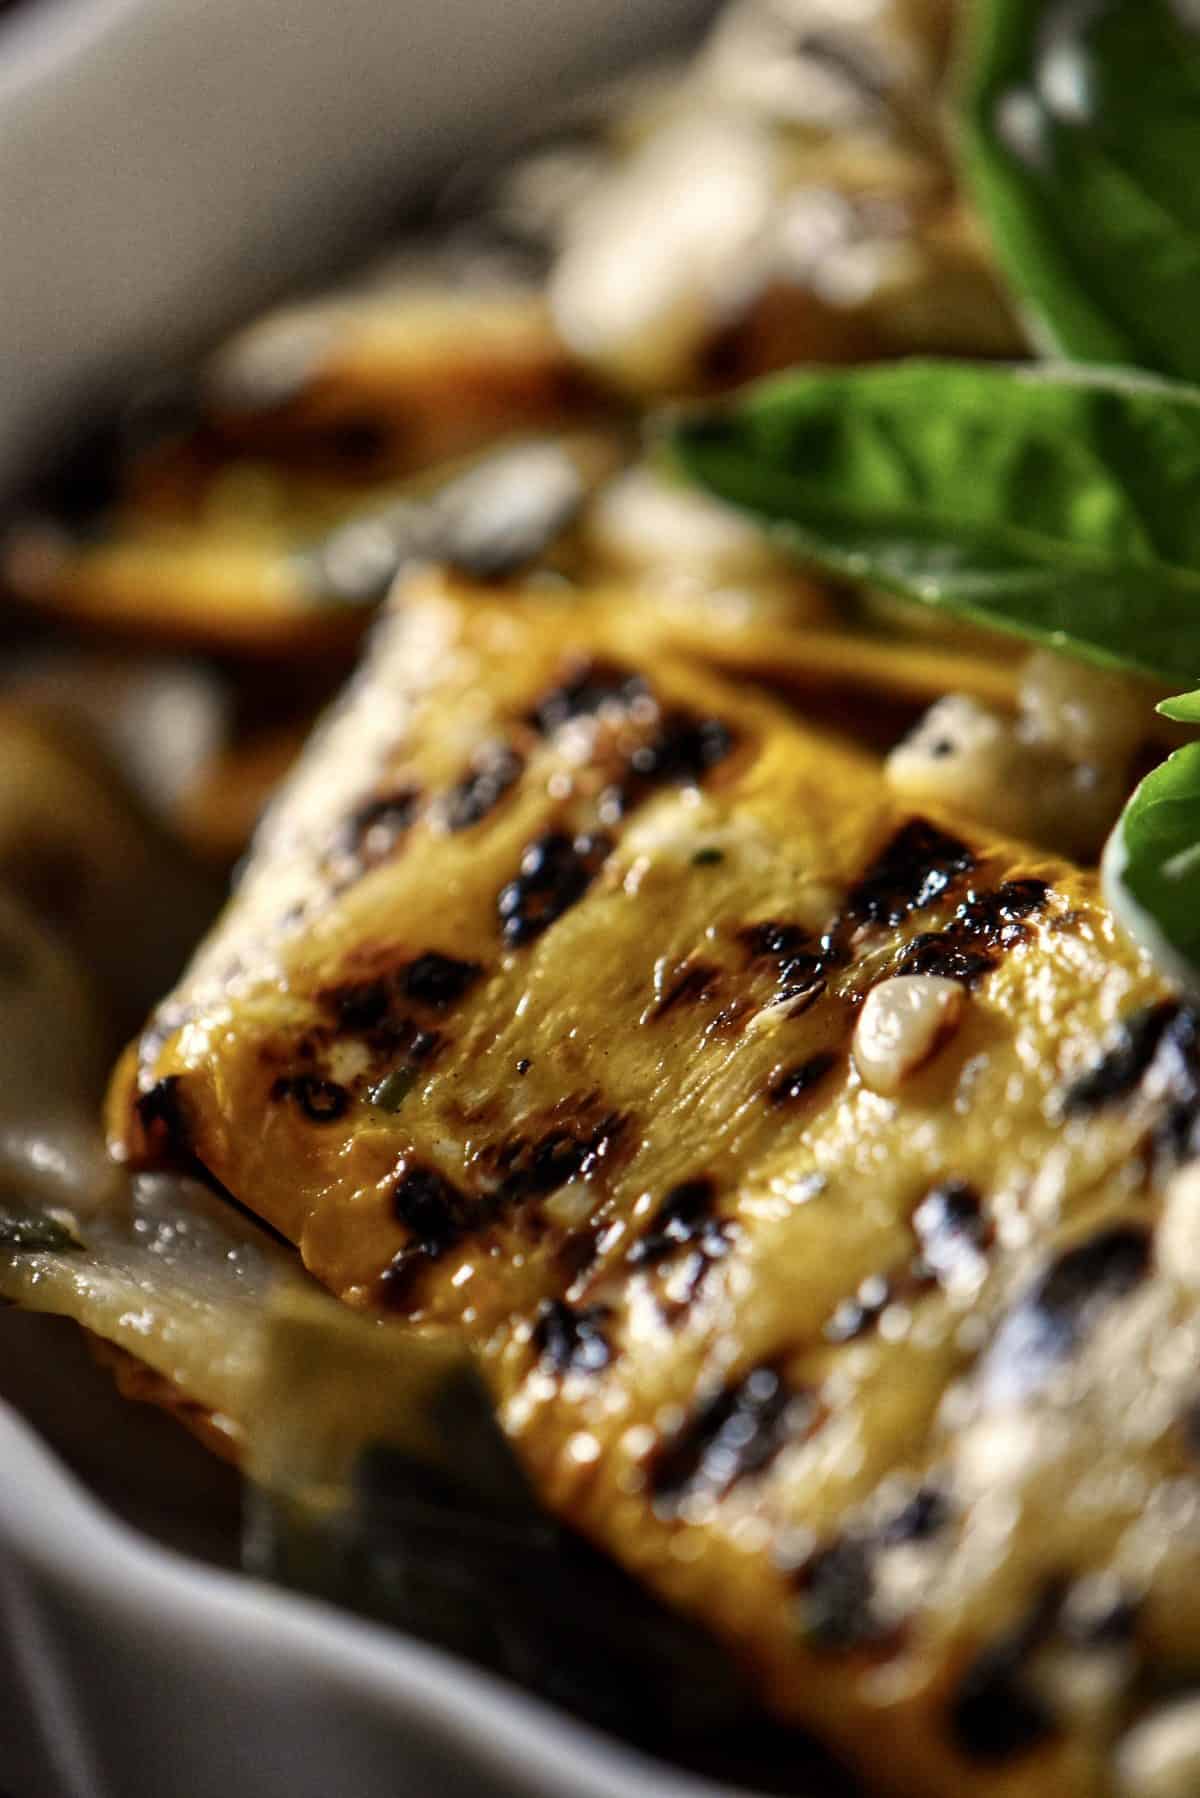 A close up of the char marks on grilled zucchini.